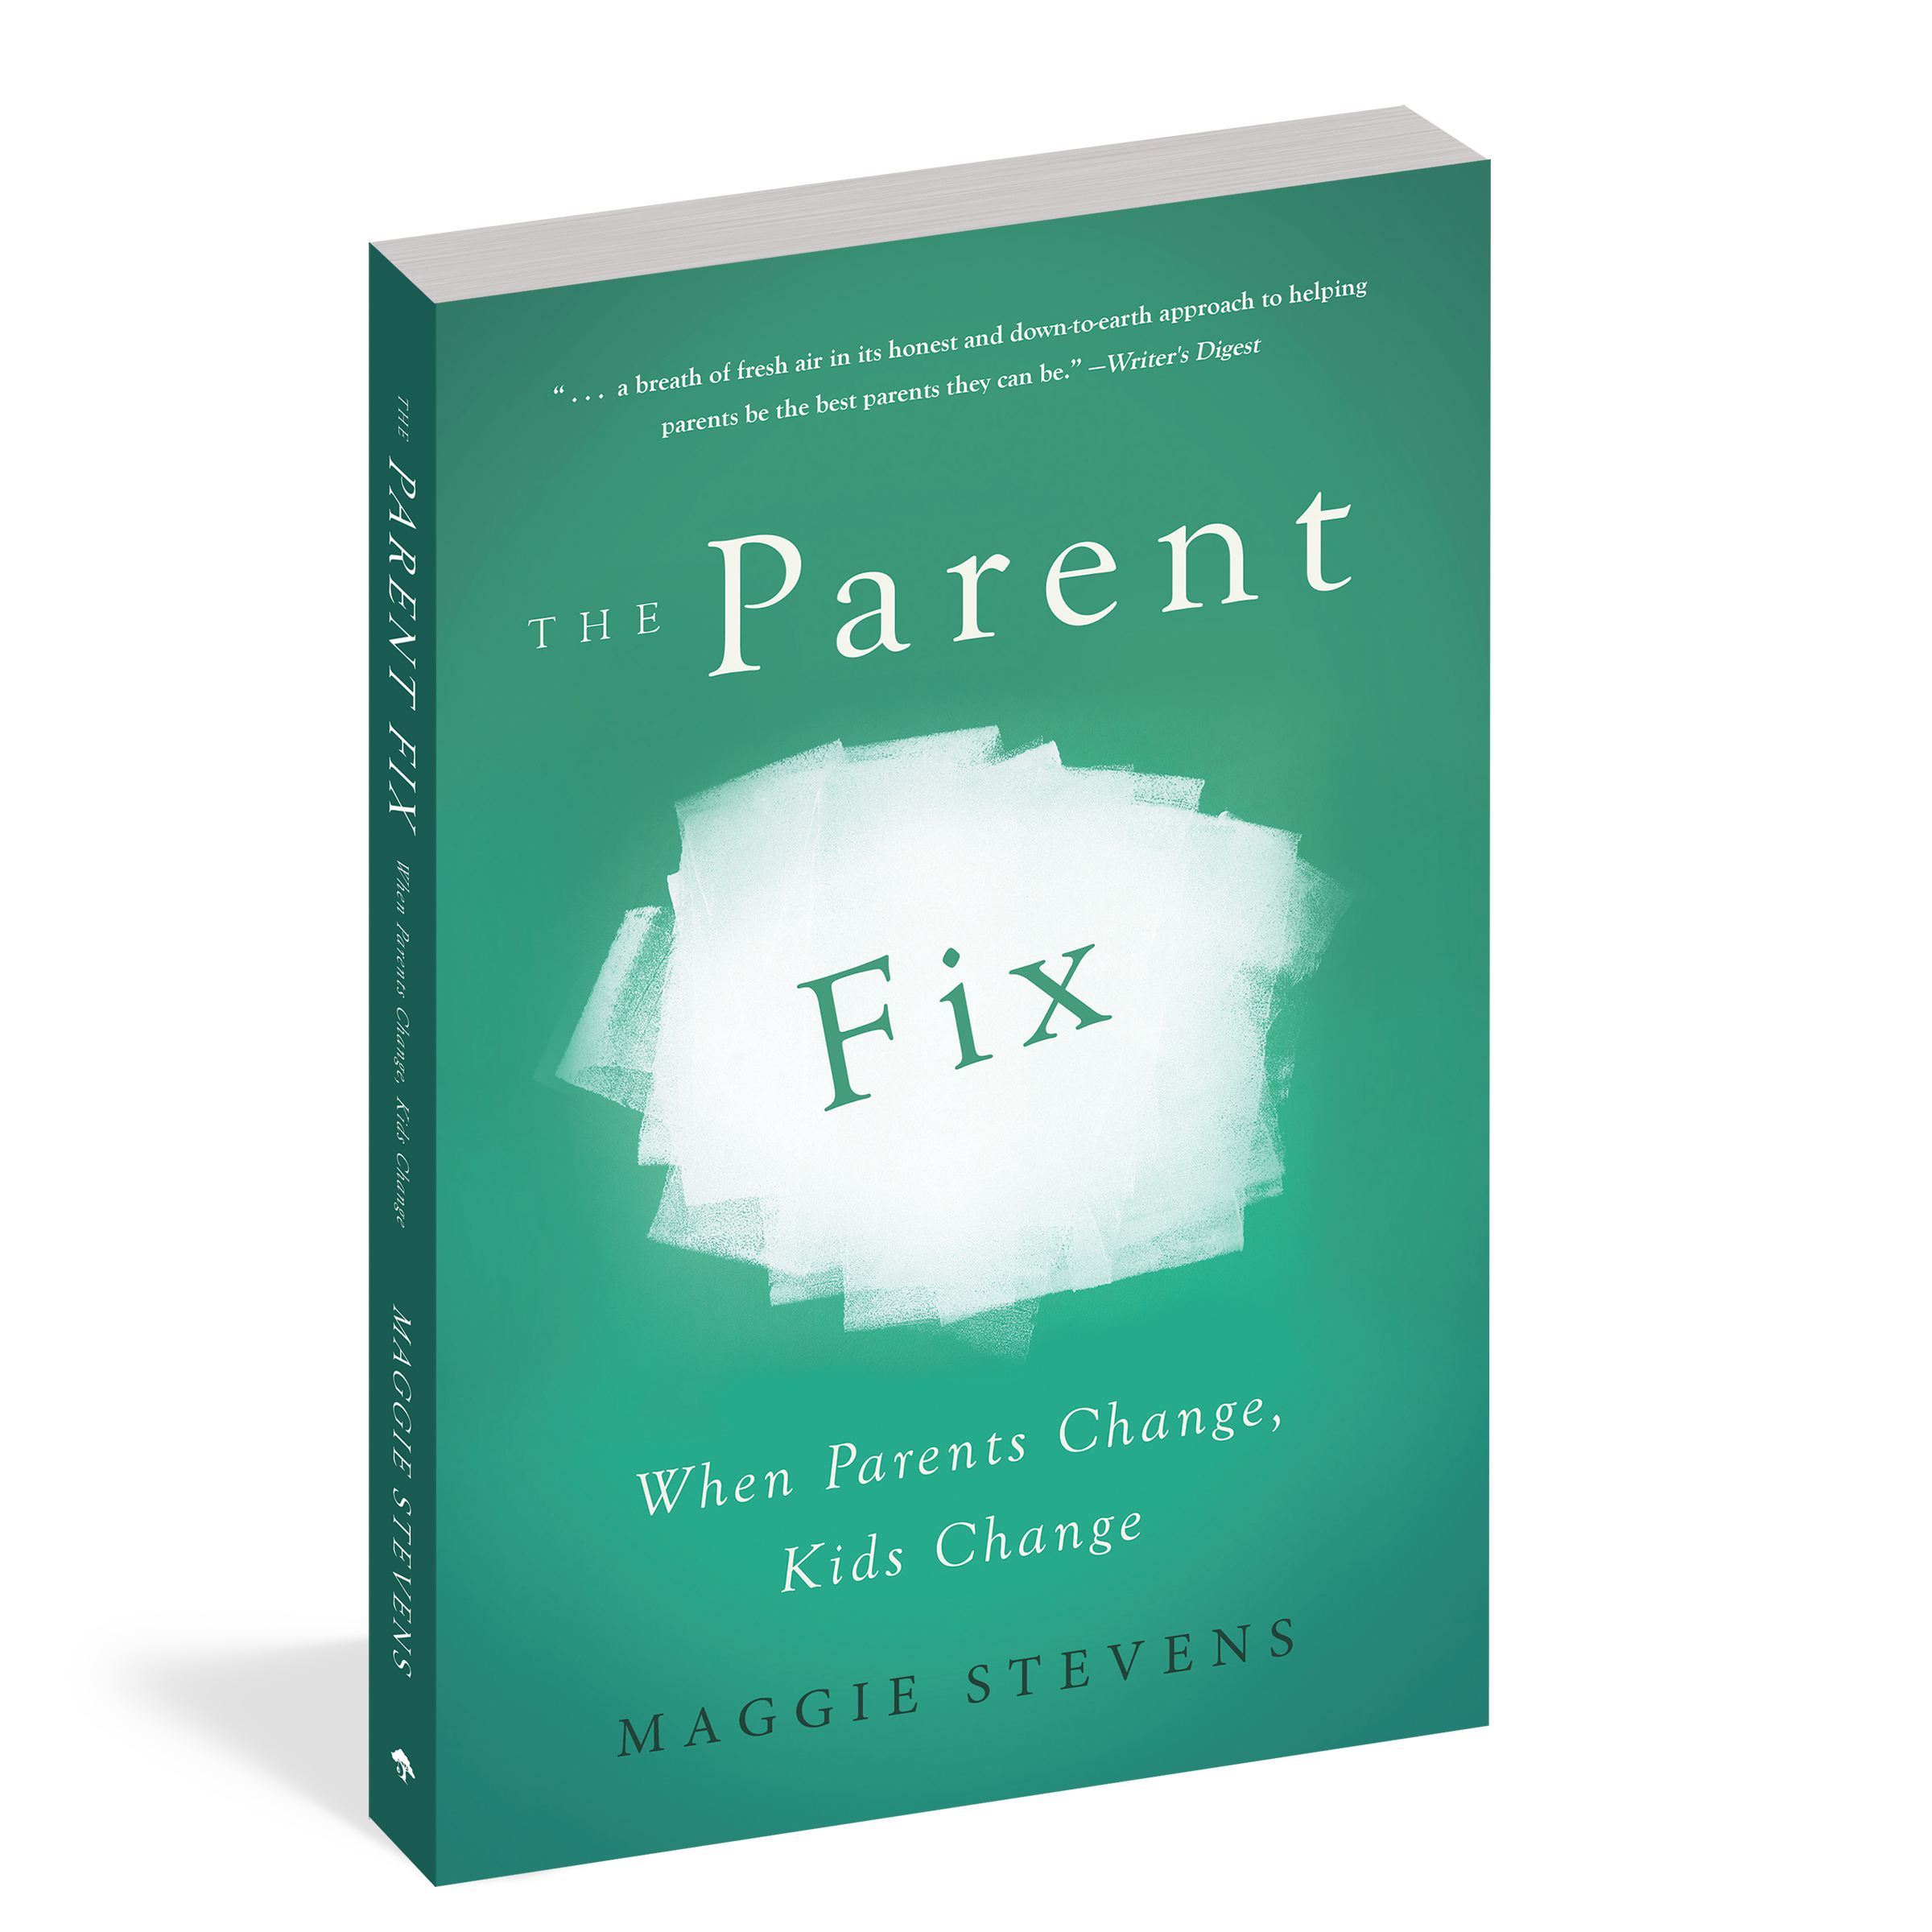 The cover of the book The Parent Fix.